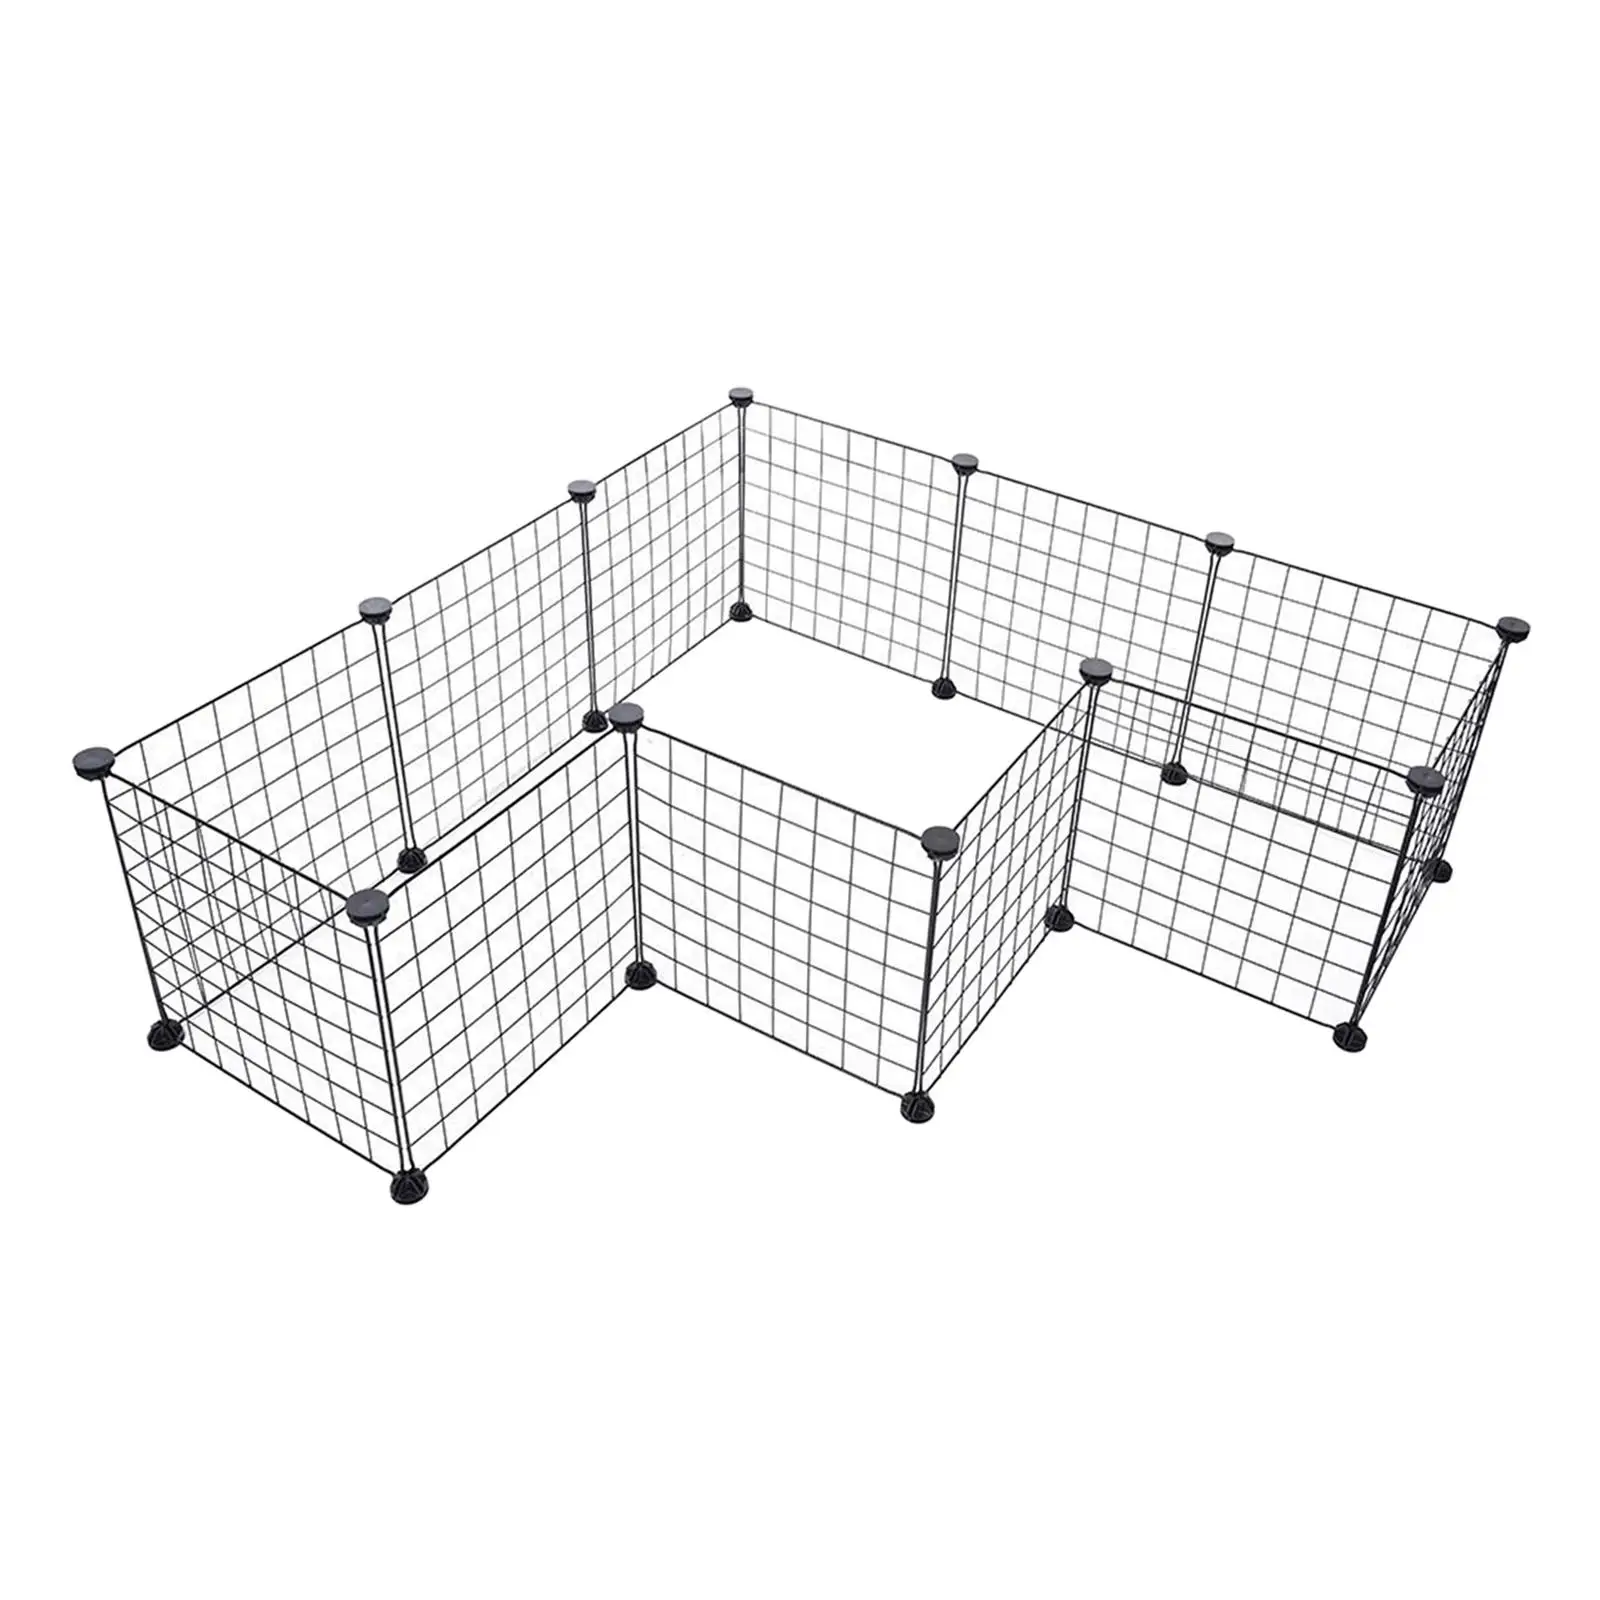 Dog Playpen Portable Dog Exercise Pen Indoor Outdoor Small Animal Cage DIY 12 Panels Pet Fence for Hamster Rabbit Hedgehog